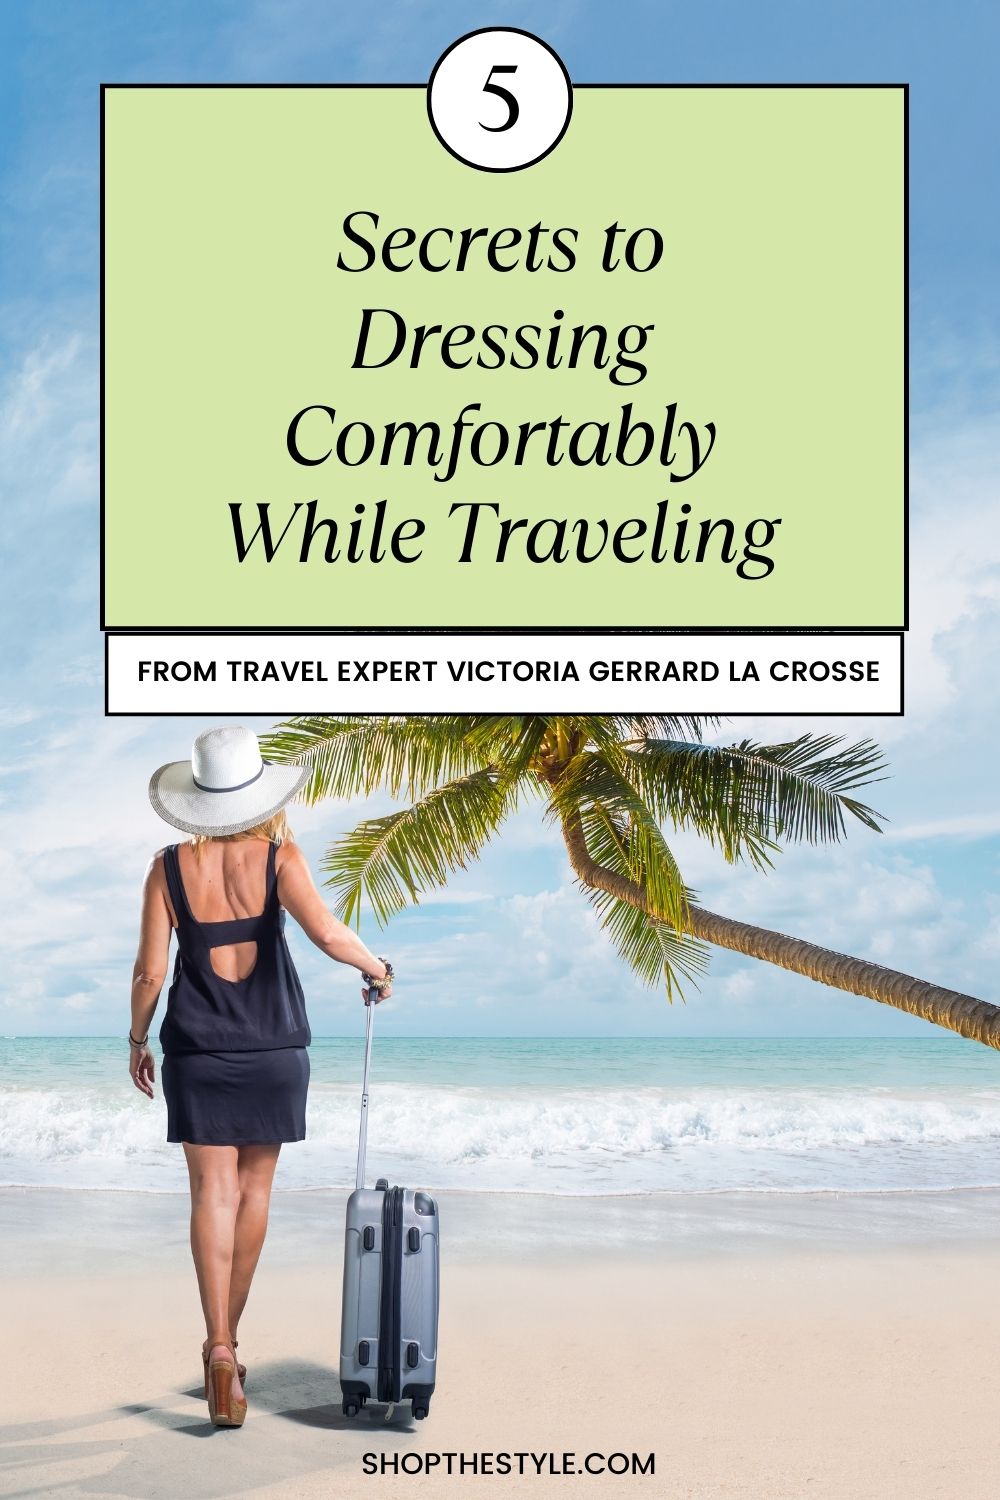 Travel Expert Victoria Gerrard La Crosse Shares Her 5 Secrets to Dressing Comfortably While Traveling